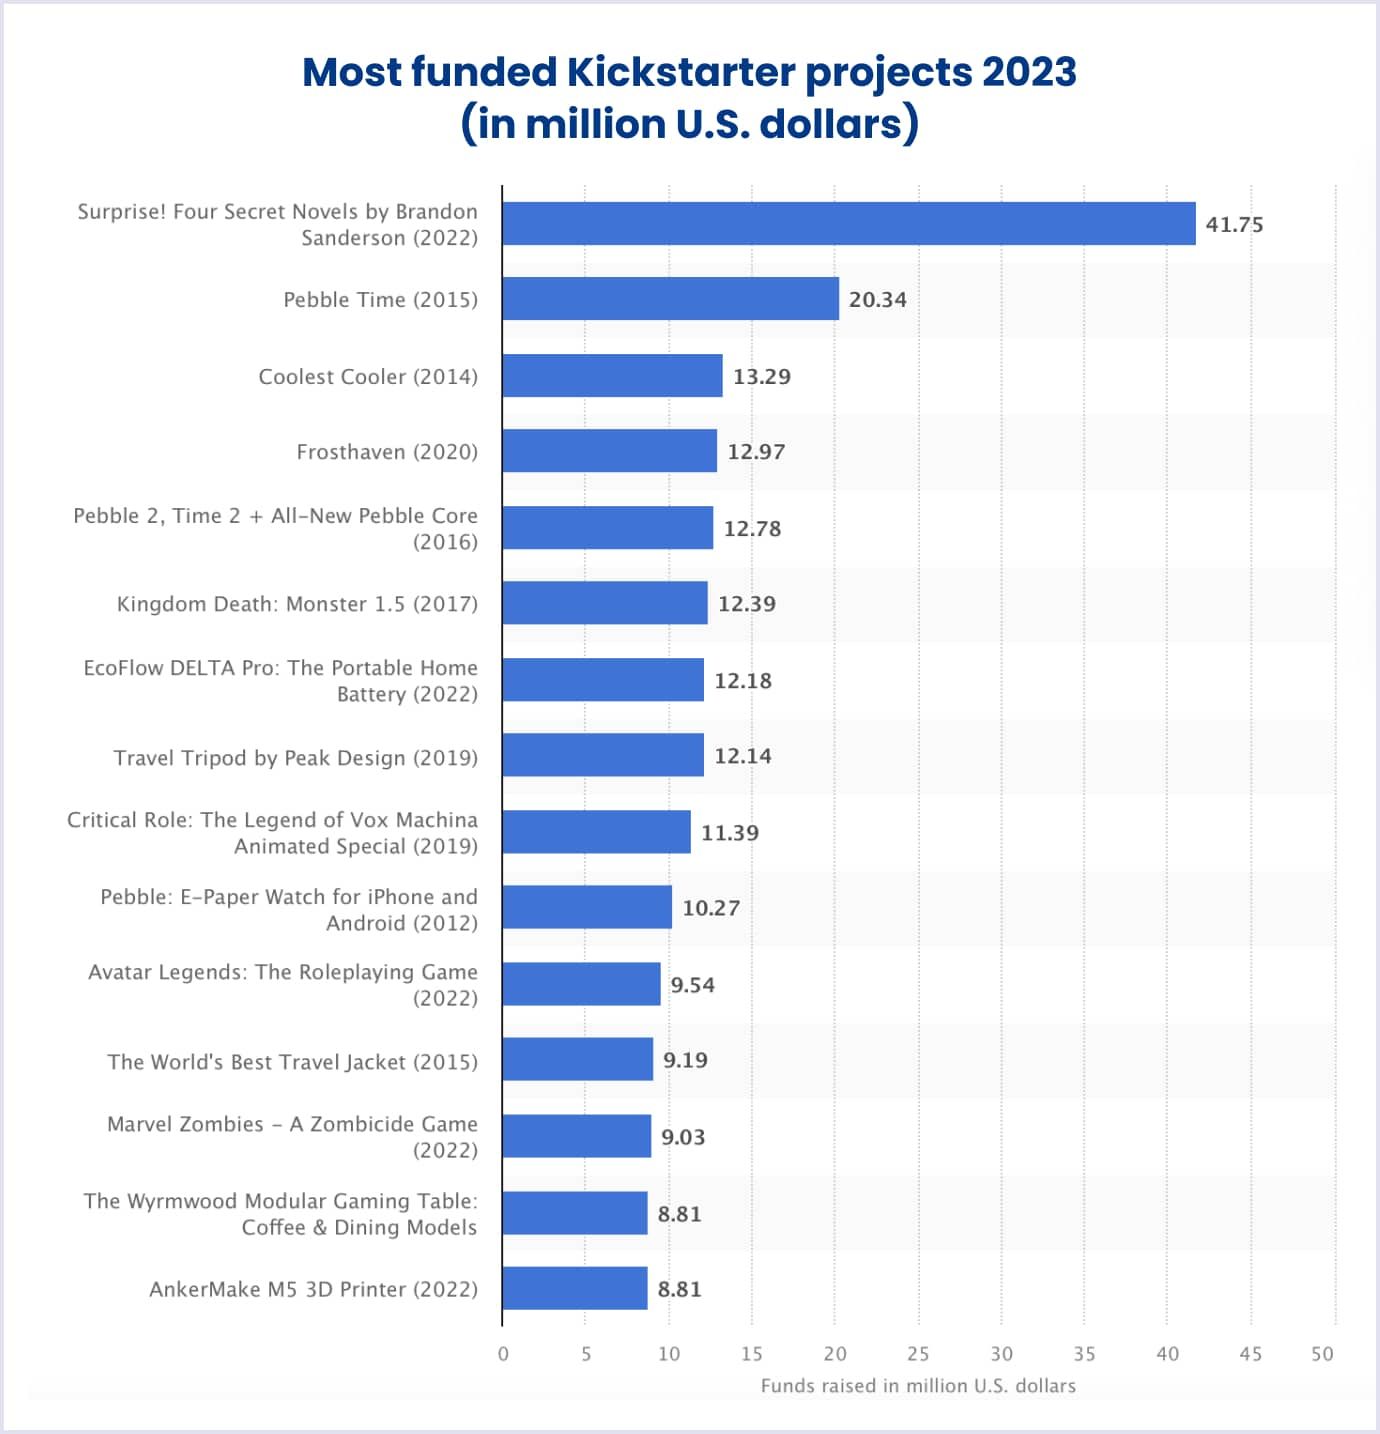 Most funded Kickstarter projects 2023